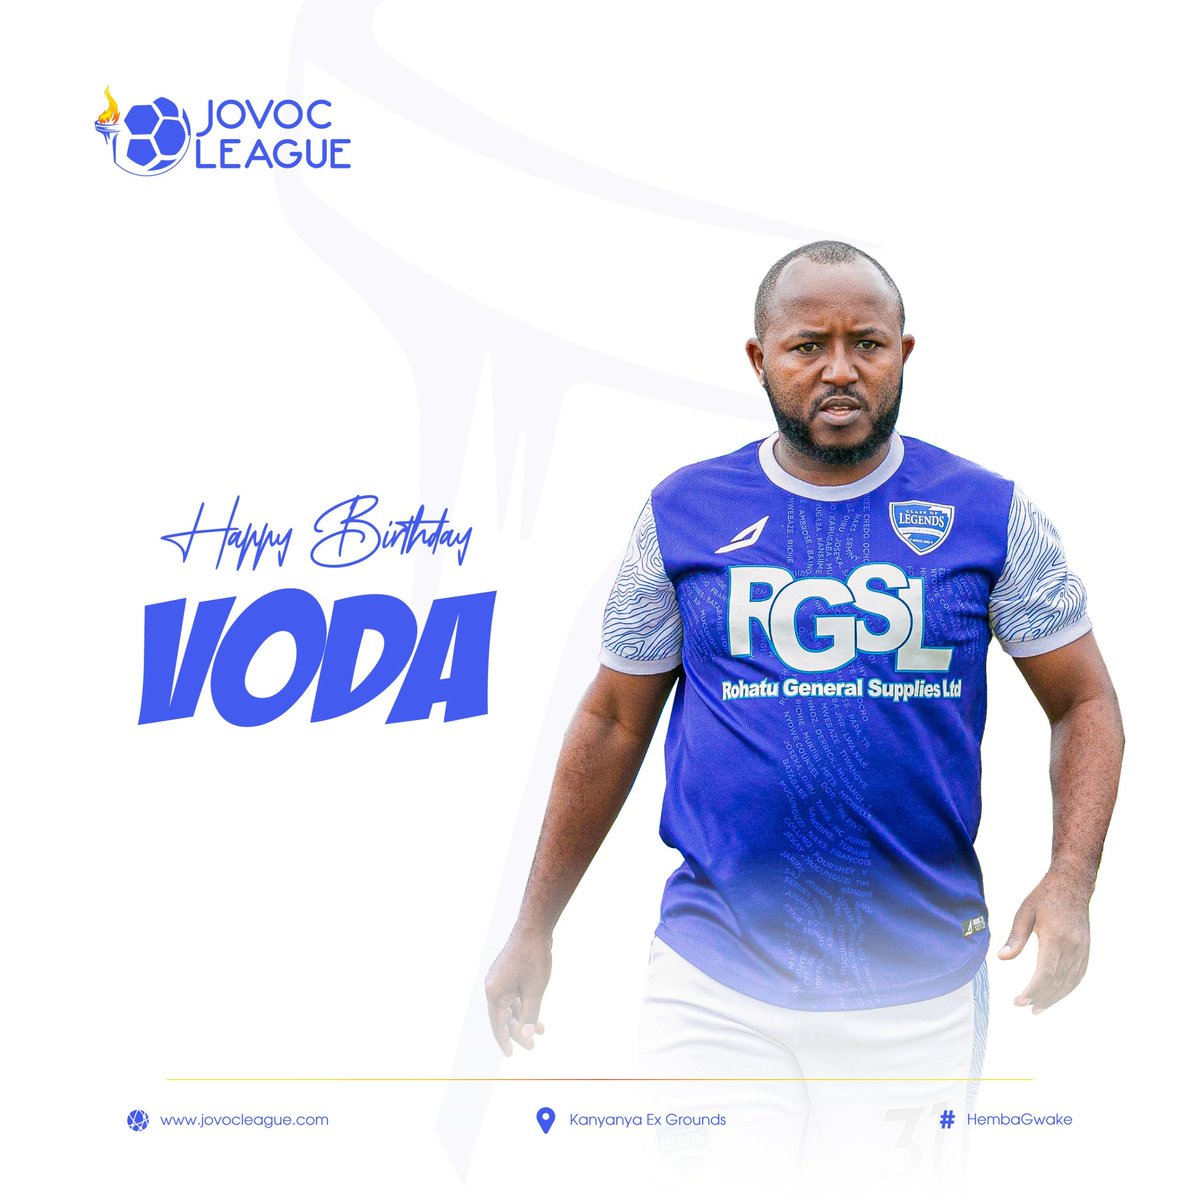 Happy Birthday to you Voda, our incredible sponsor! Your unwavering support has been instrumental in driving the growth of our brand. Here's to celebrating you and all you do for us! #TogetherStronger